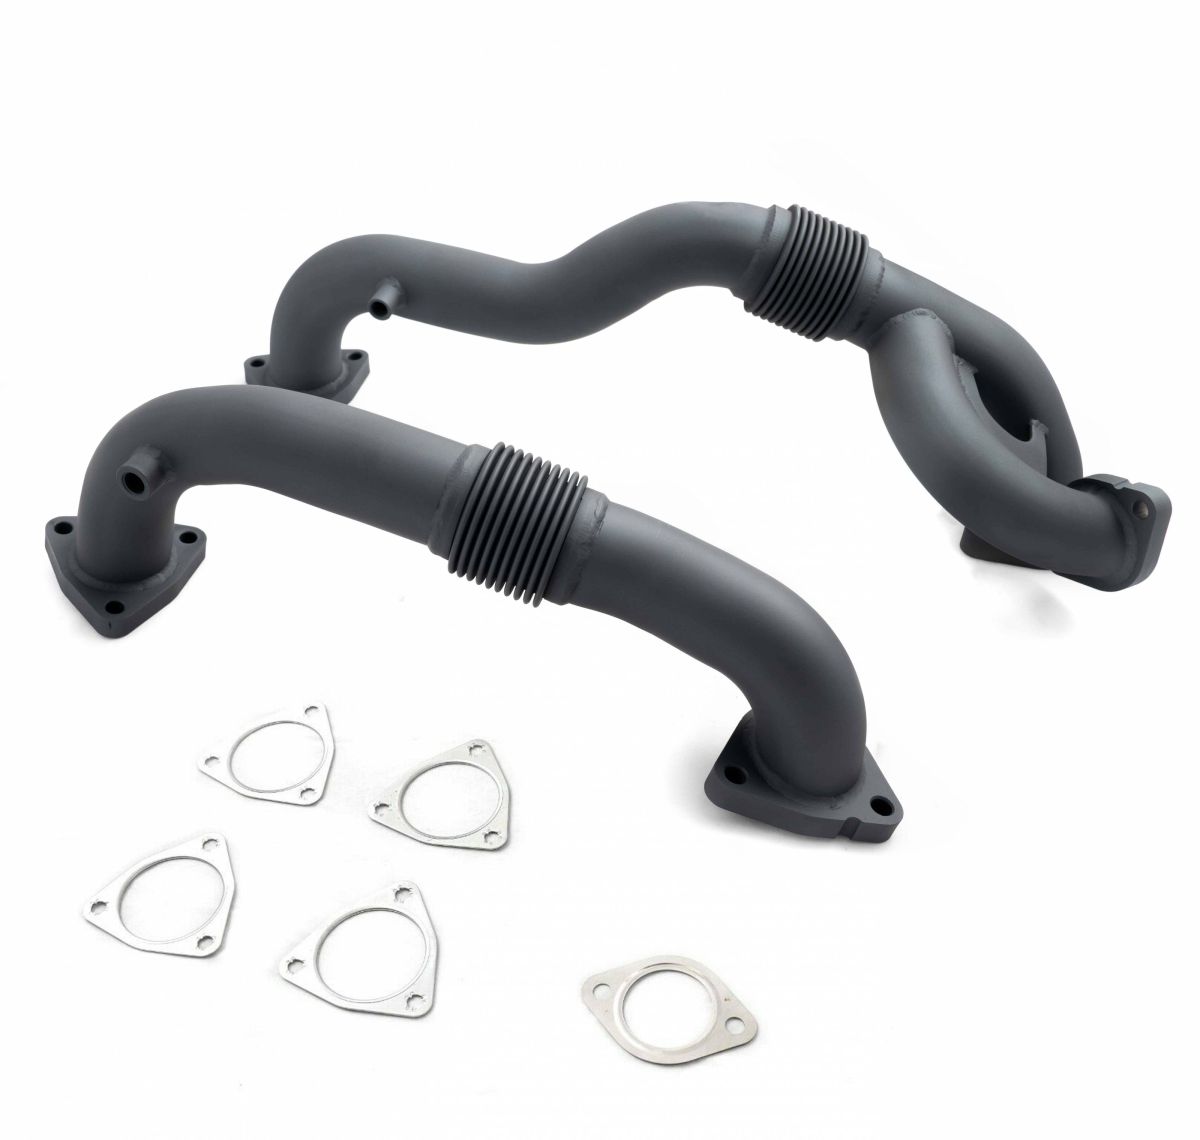 Rudy's Performance Parts - Rudy's High Temp Coated Heavy Duty Thick Wall Up Pipe Kit For 08-10 6.4 Powerstroke